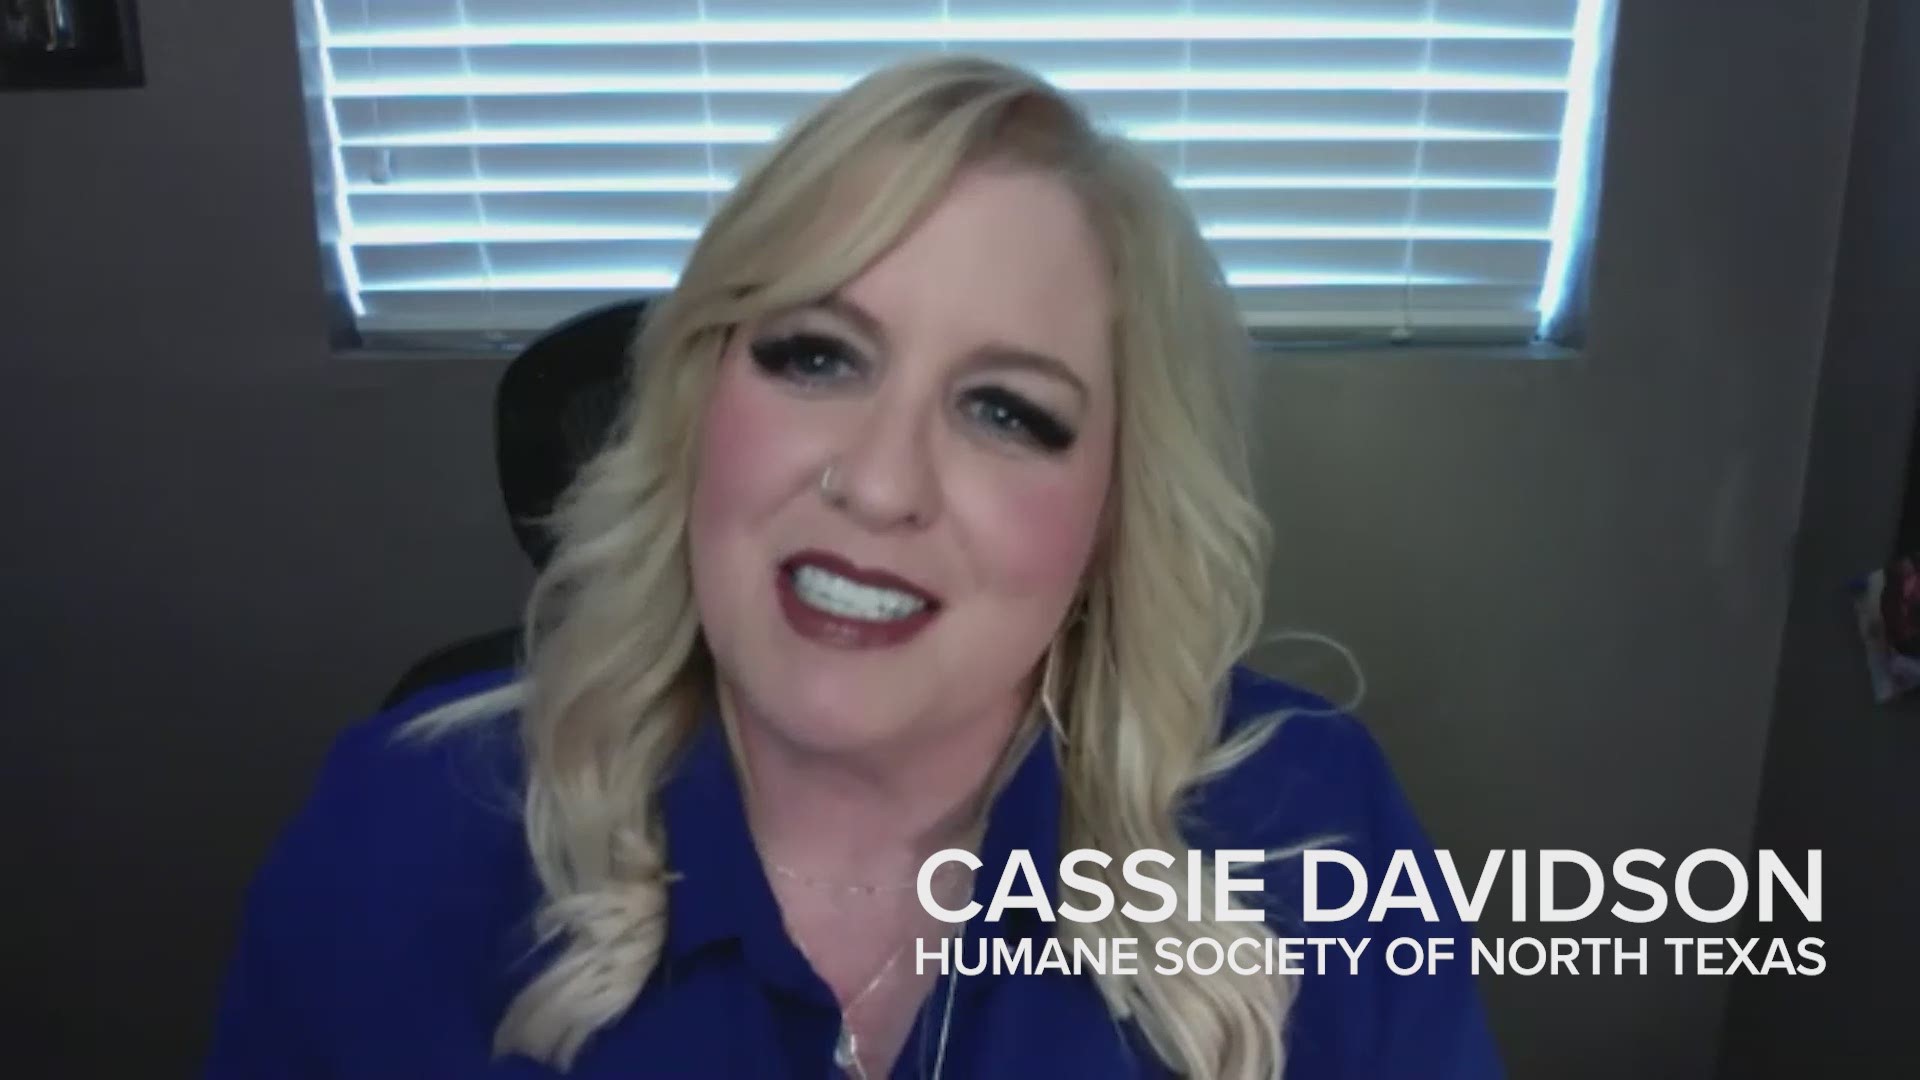 Cassie Davidson works for the Humane Society of North Texas. She explains the difference between fostering and adopting.